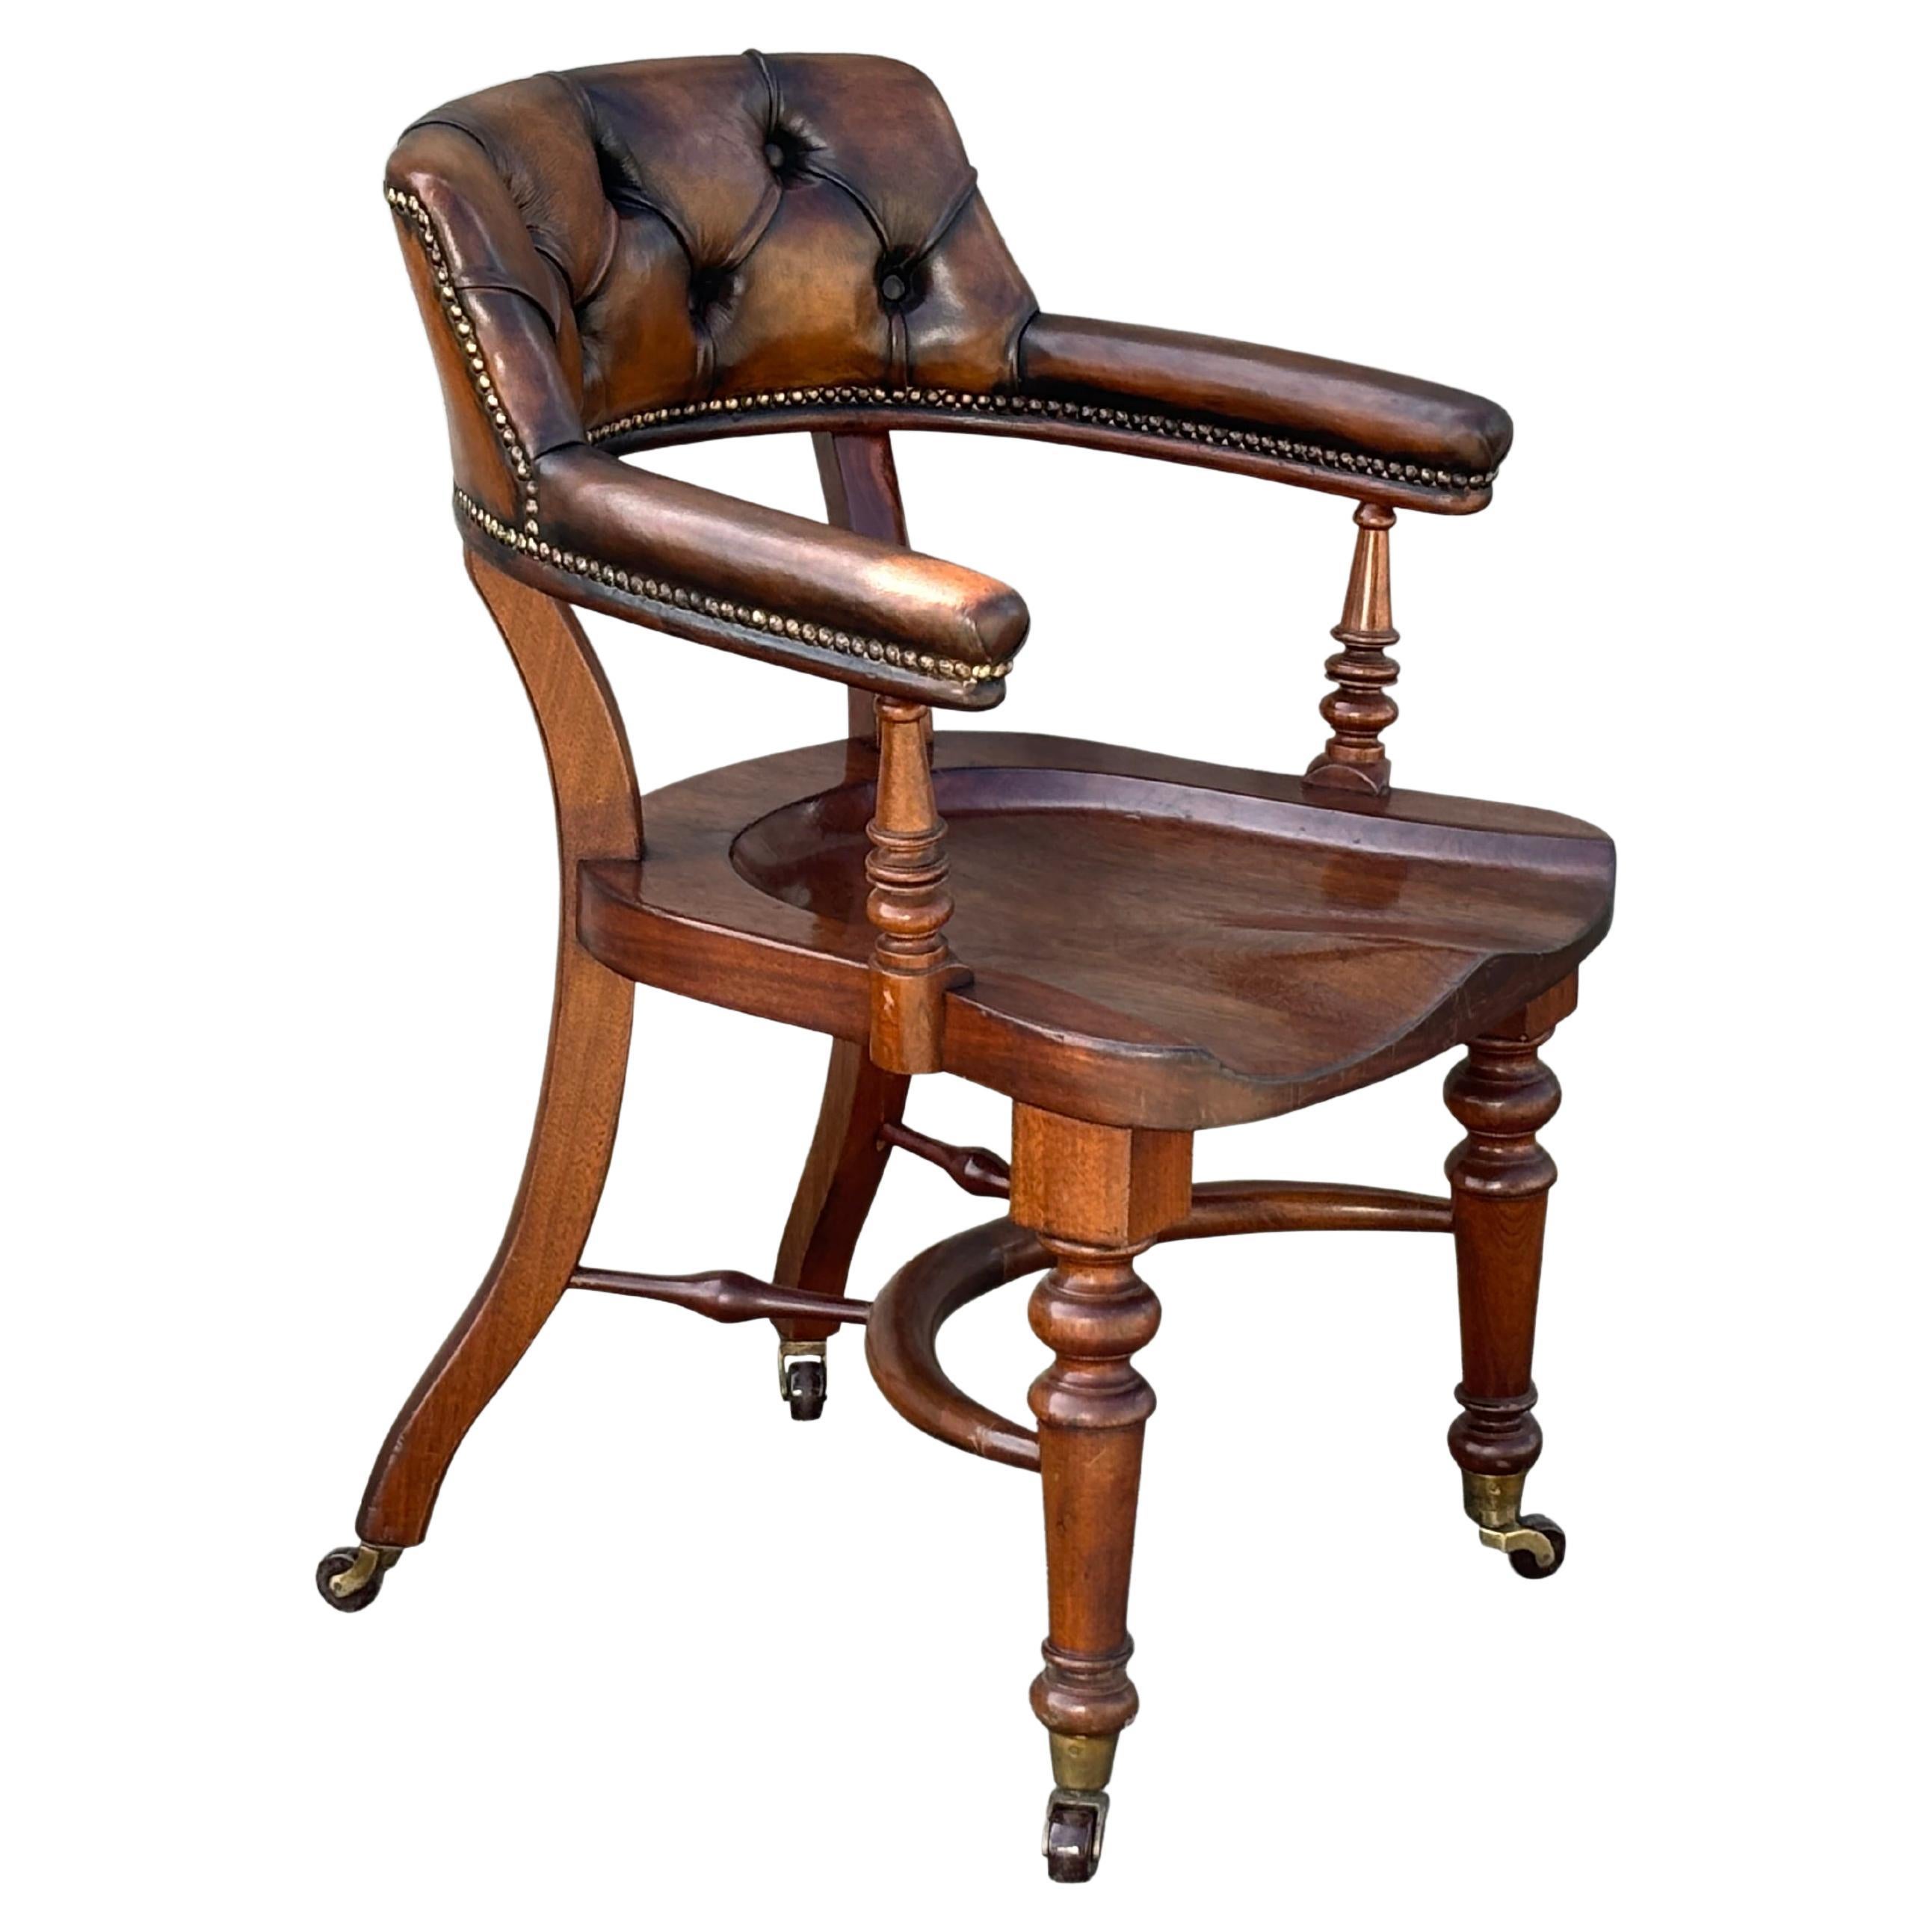 19th Century Saddle Seat Leather Desk Armchair For Sale